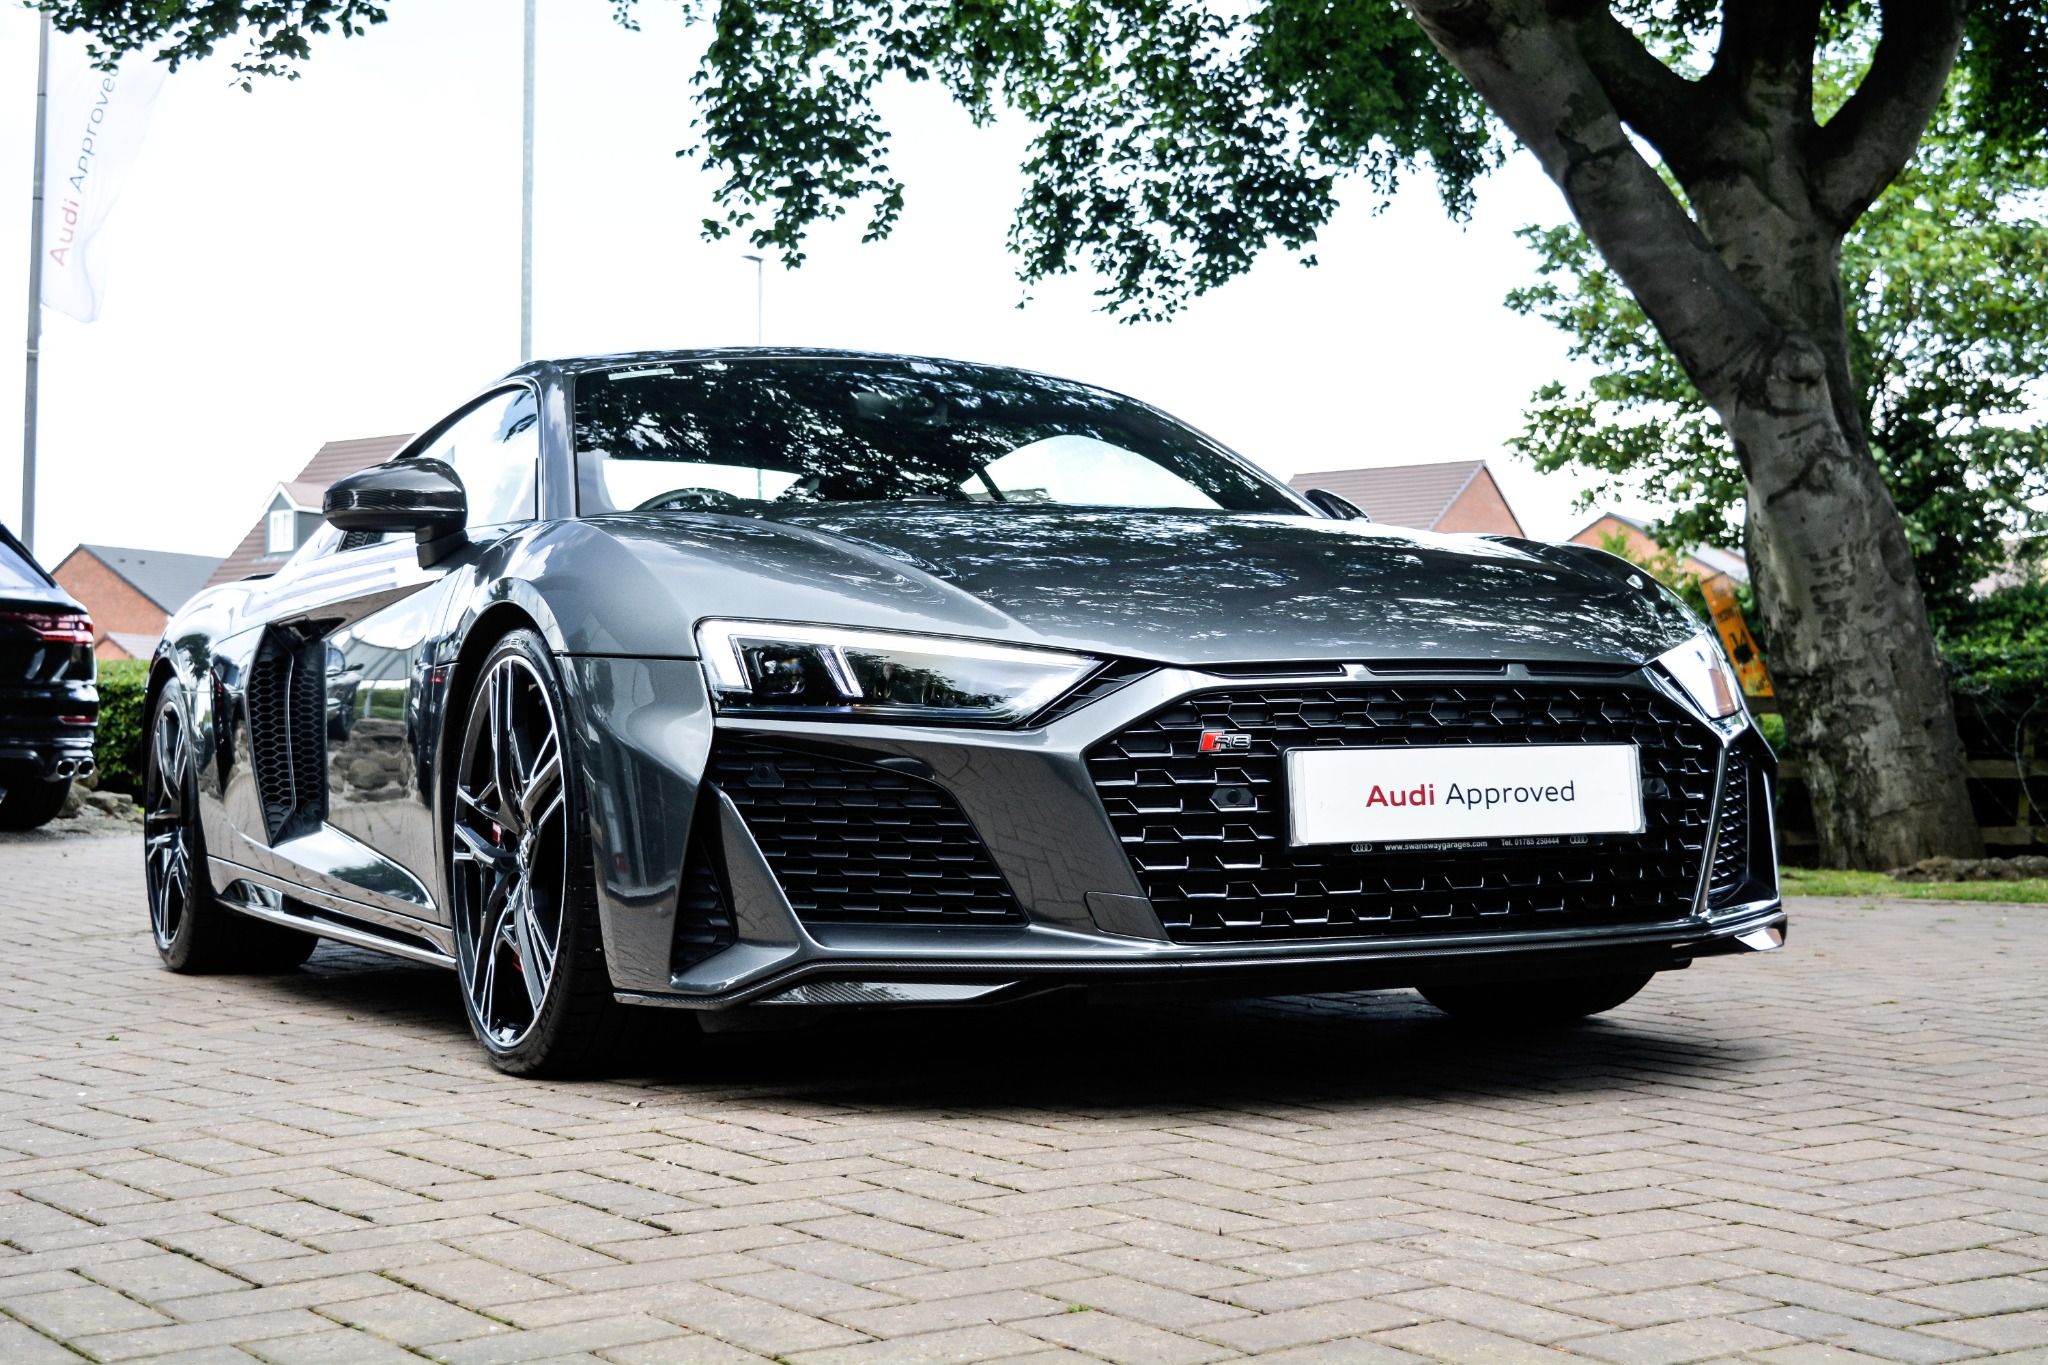 Front view of grey Audi R8 coupe with black grill